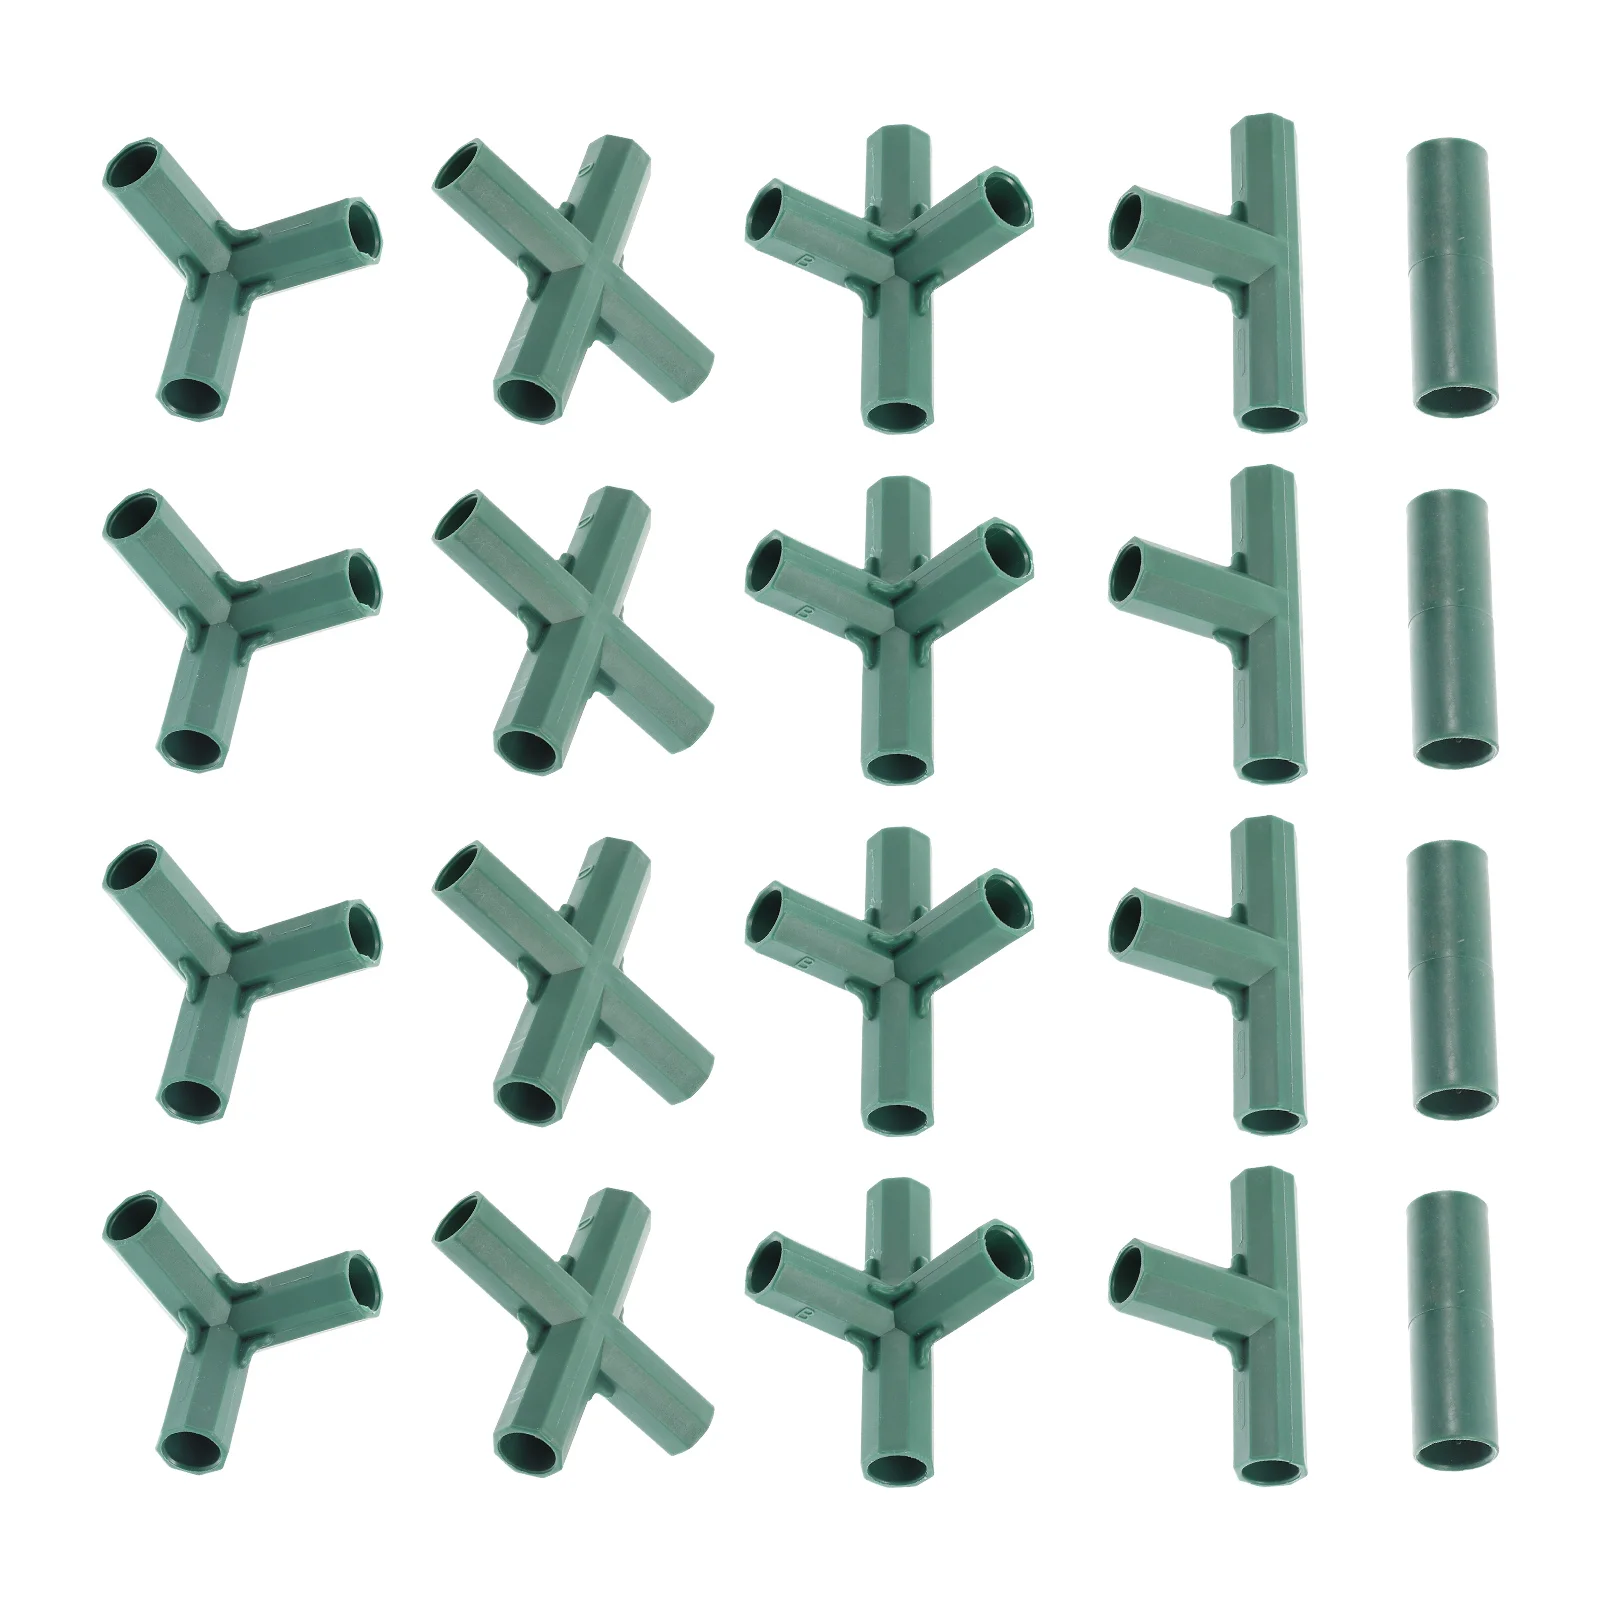 

Connector Connectors Joints Frame Garden Gardening Greenhouse Pole Pipe Irrigation Stake Tube Tubesfittings Connection